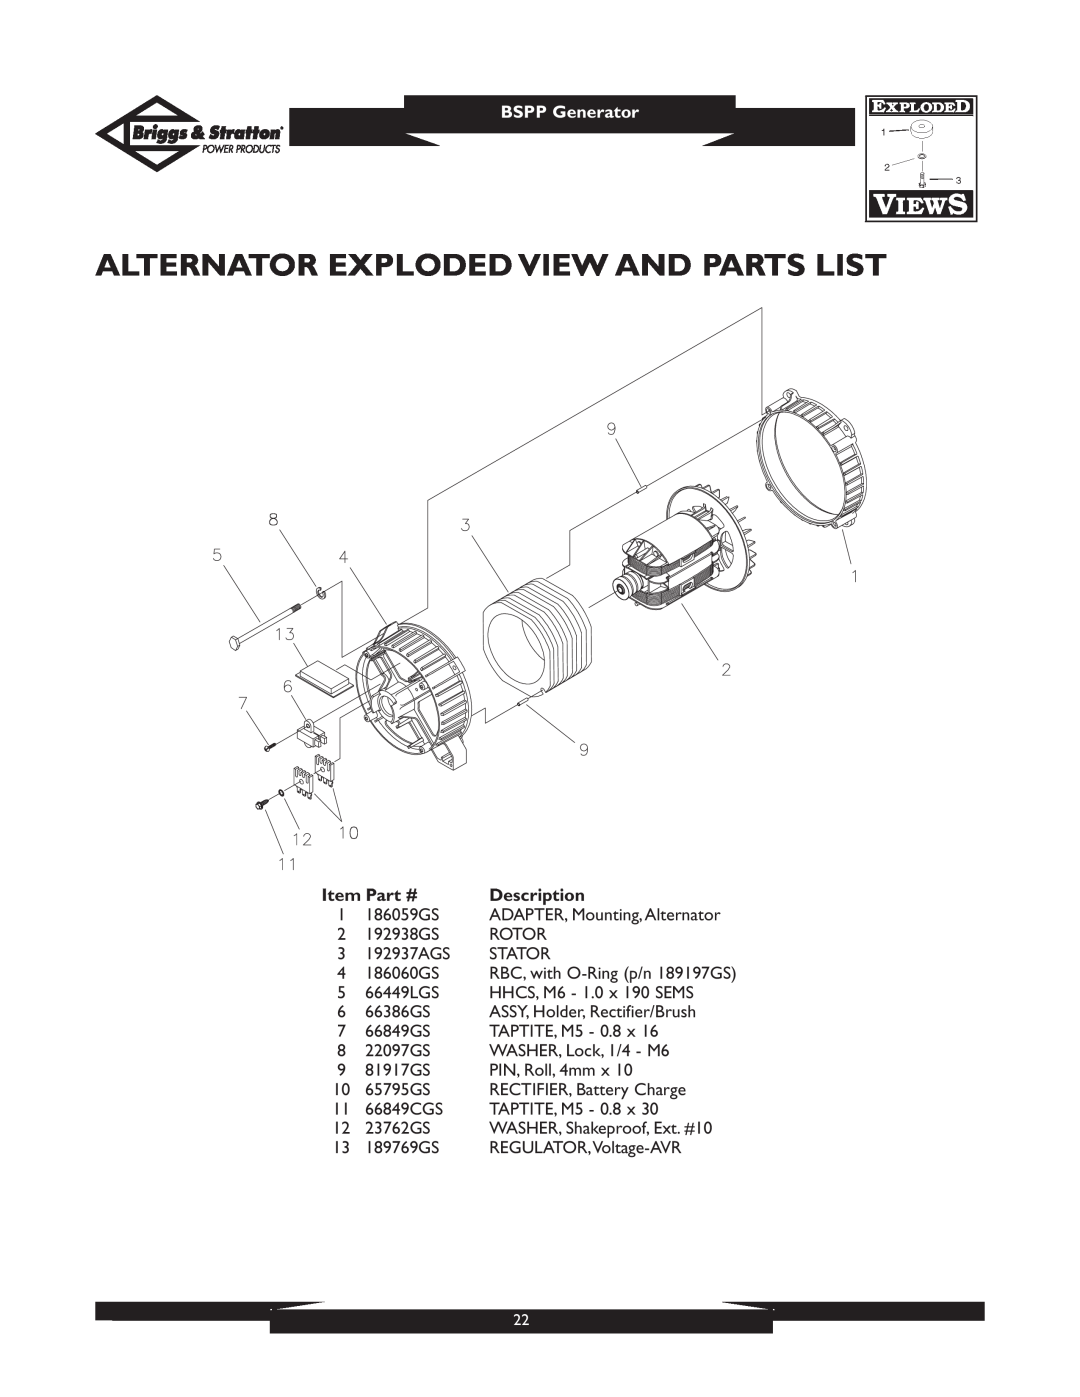 Briggs & Stratton PRO8000 owner manual Alternator Exploded View And Parts List, BSPP Generator, Description 